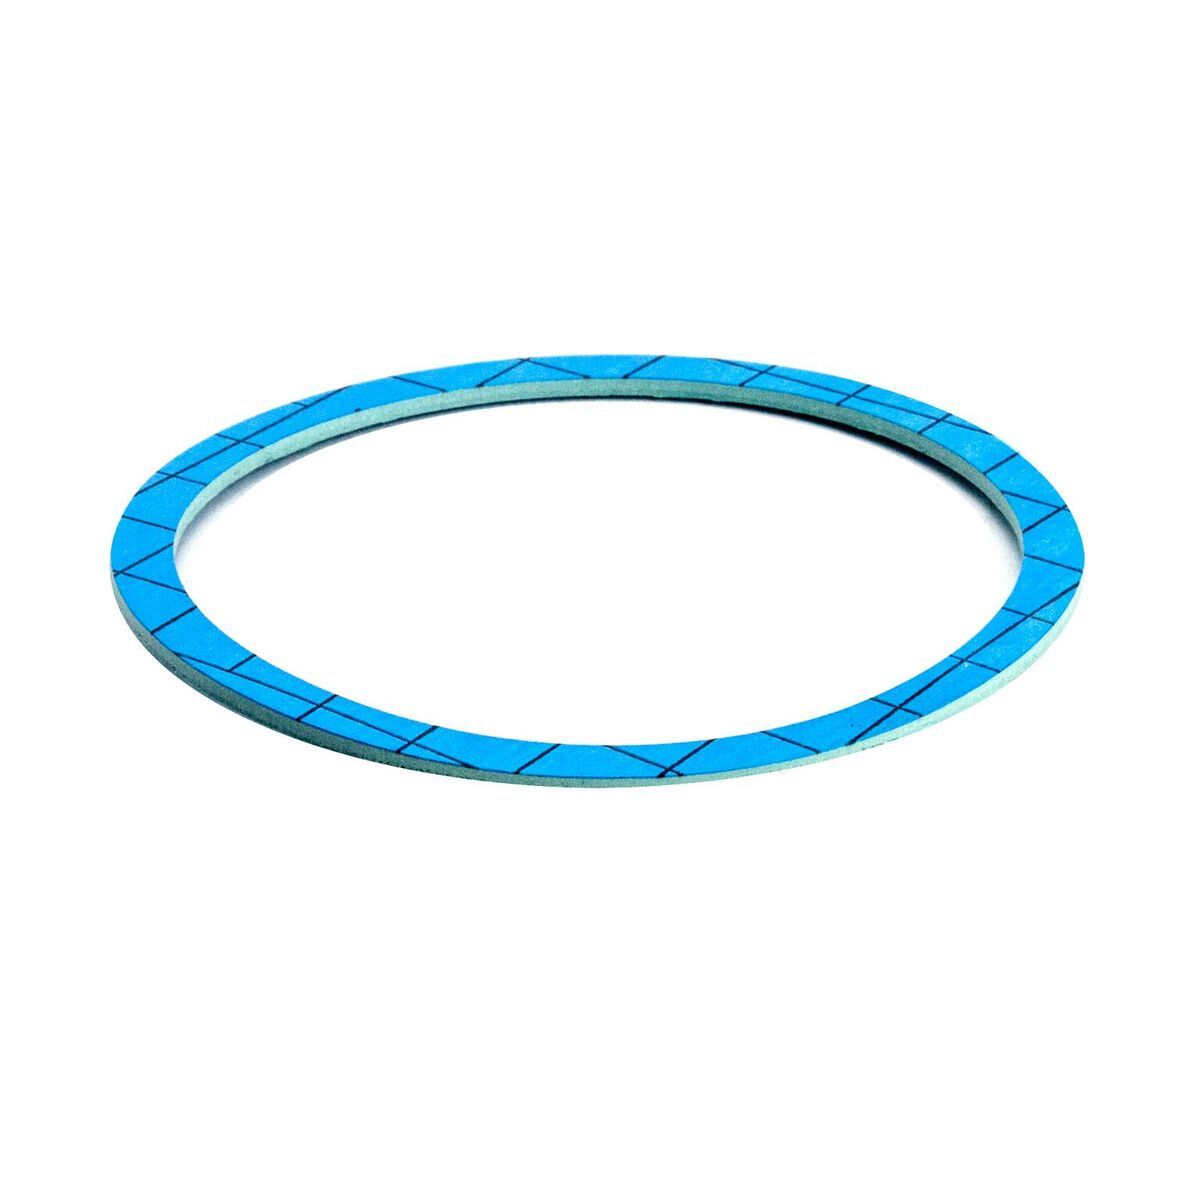 Cafelat Silicone Group Gasket for La Spaziale Machines – Clive Coffee